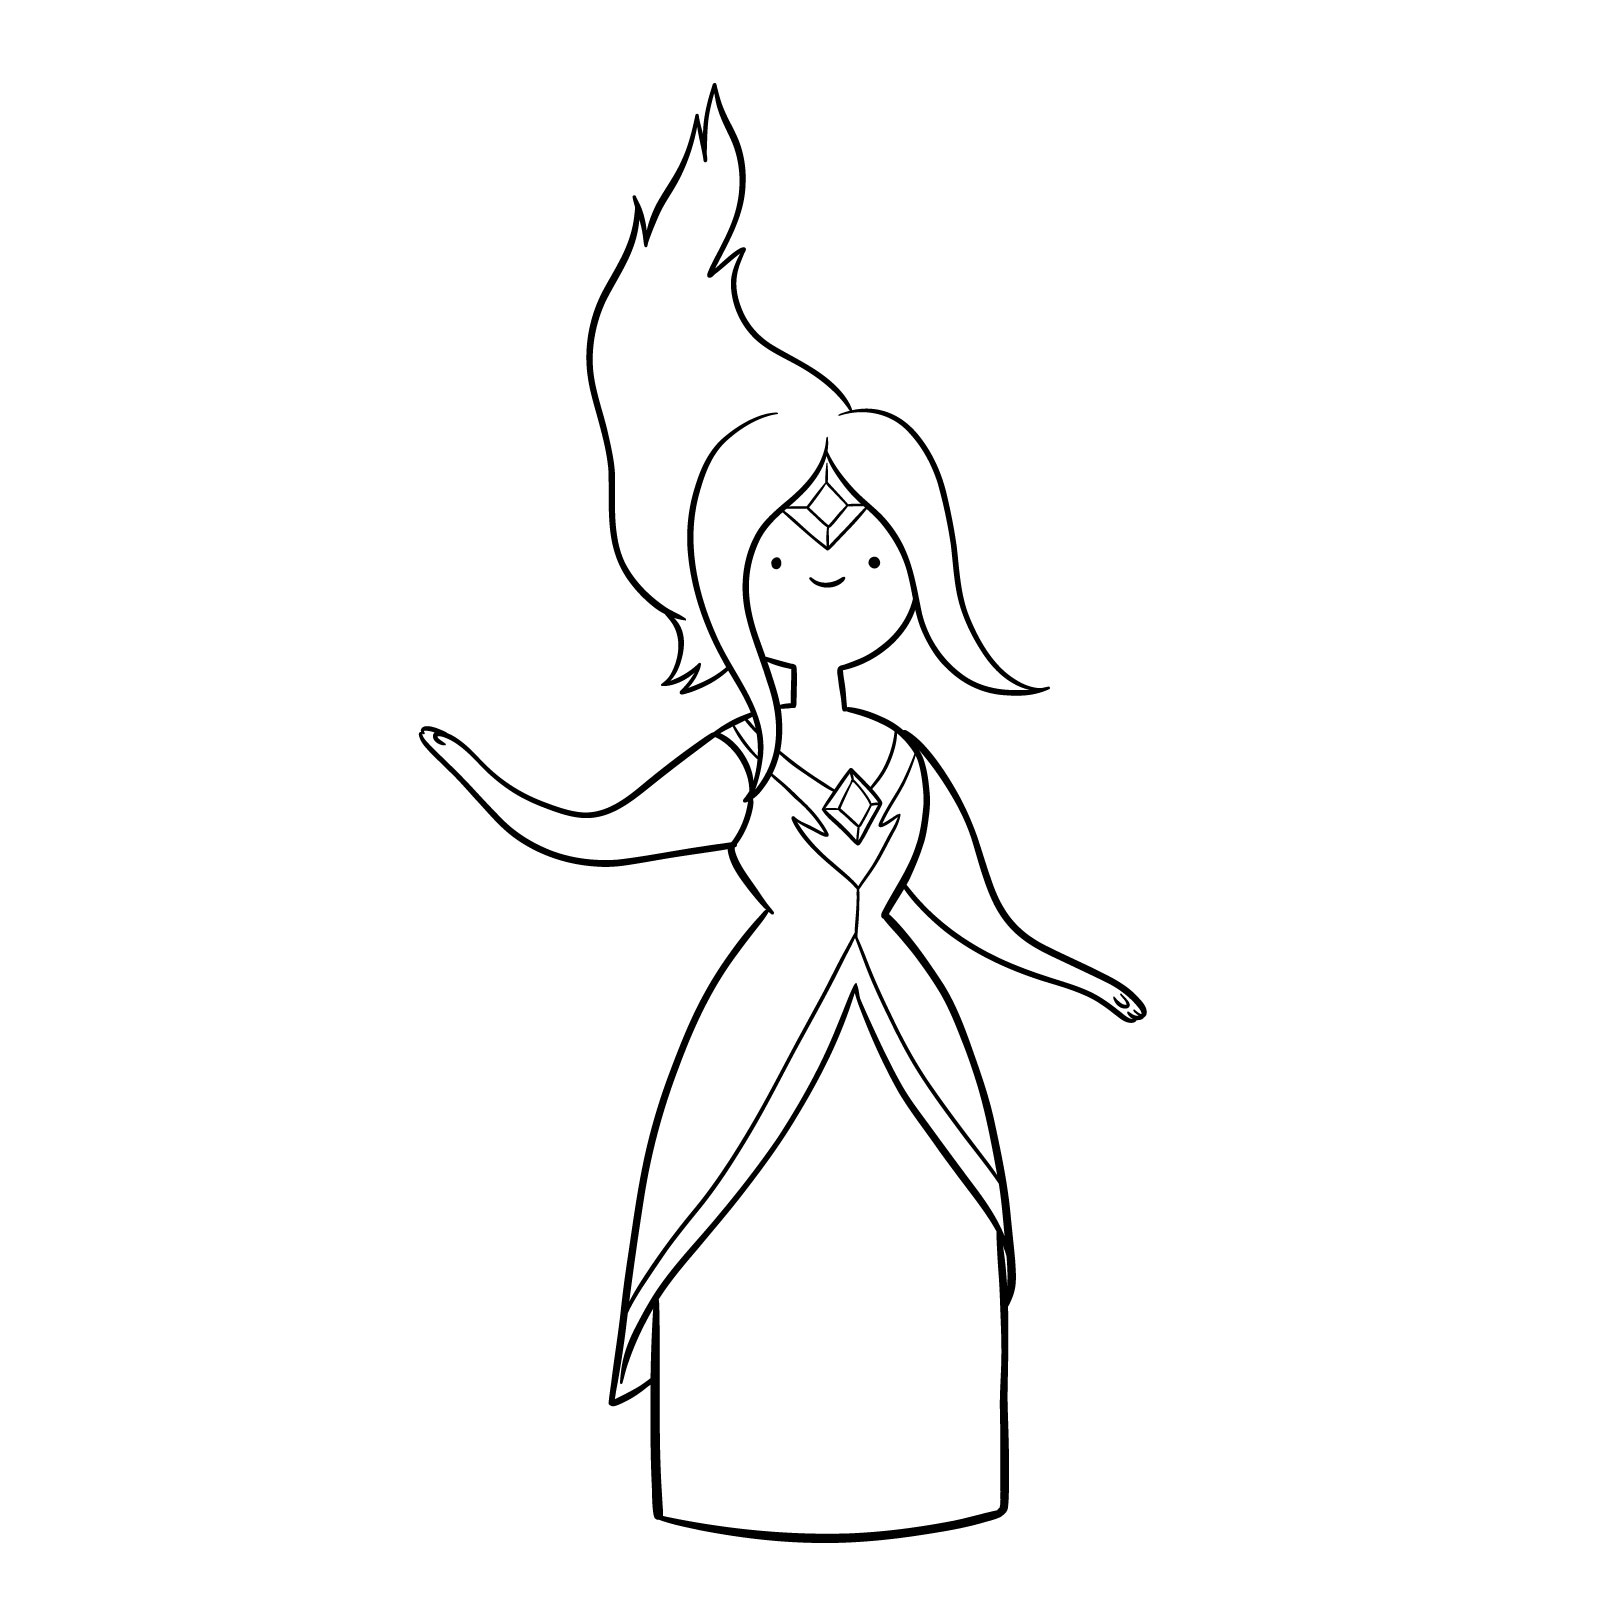 How to draw Flame Princess from Incendium Episode - final step